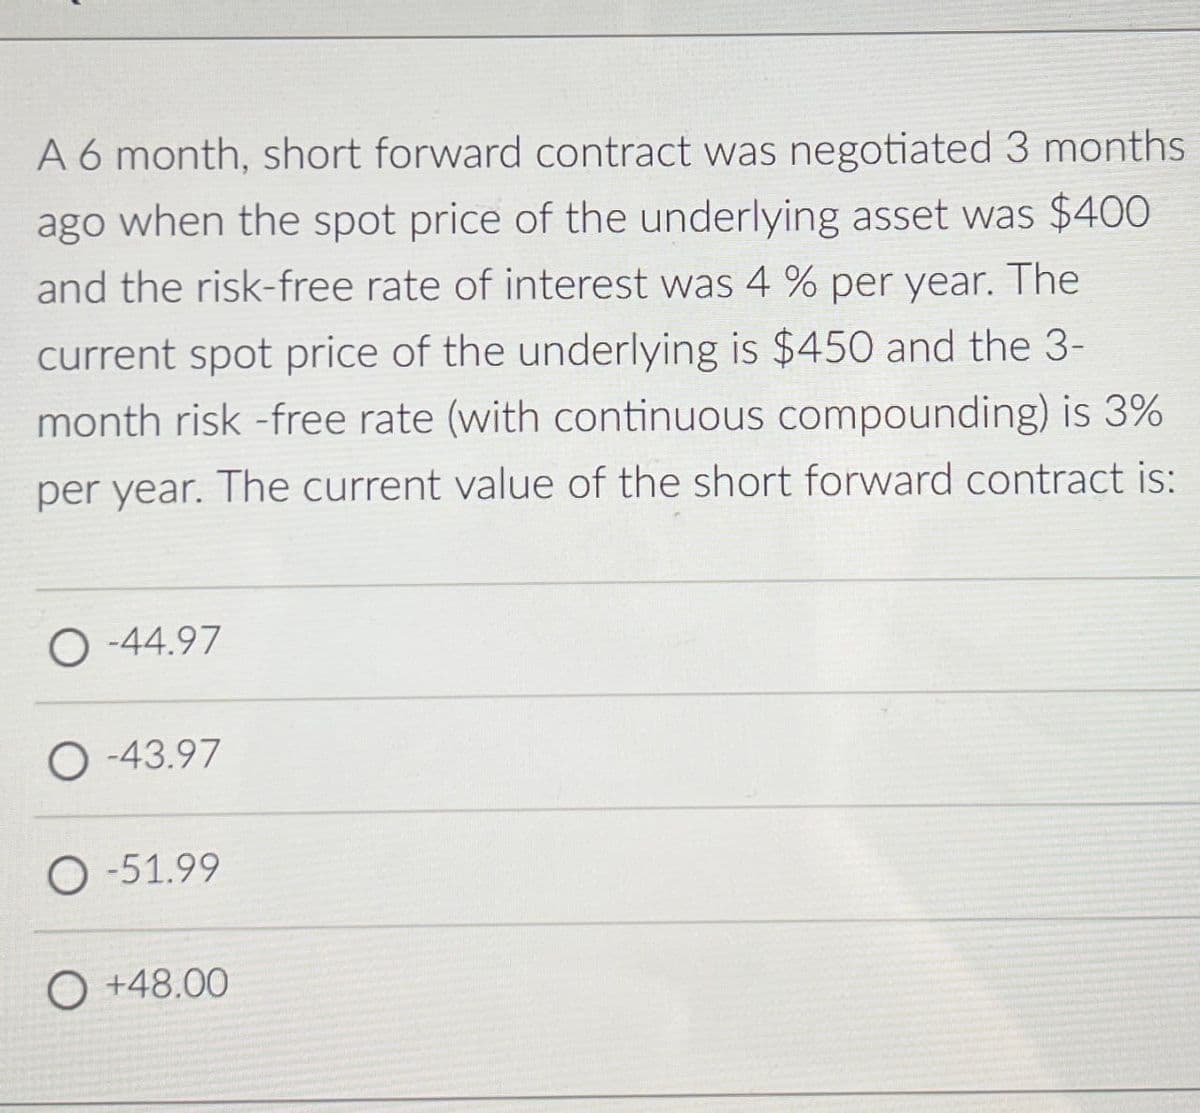 A 6 month, short forward contract was negotiated 3 months
ago when the spot price of the underlying asset was $400
and the risk-free rate of interest was 4% per year. The
current spot price of the underlying is $450 and the 3-
month risk-free rate (with continuous compounding) is 3%
per year. The current value of the short forward contract is:
O-44.97
O-43.97
O-51.99
O+48.00